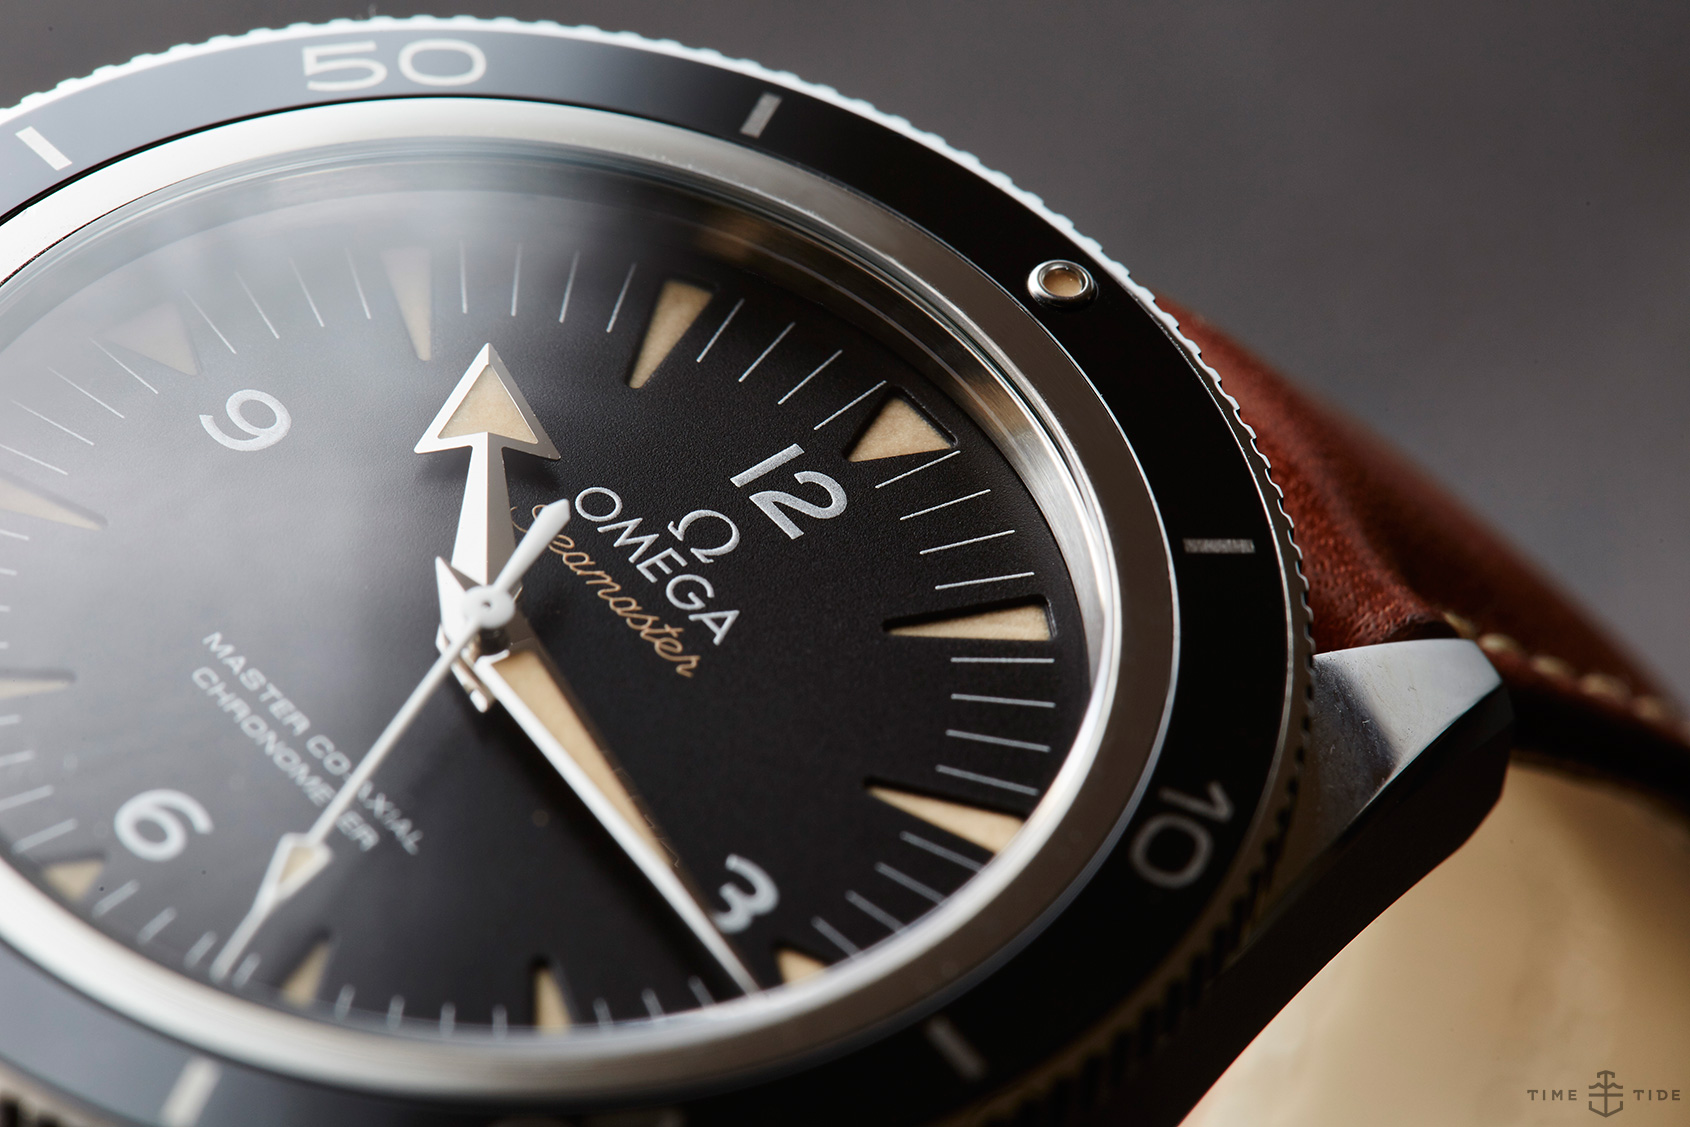 Reviewing The Omega Seamaster 300 Replica Watch